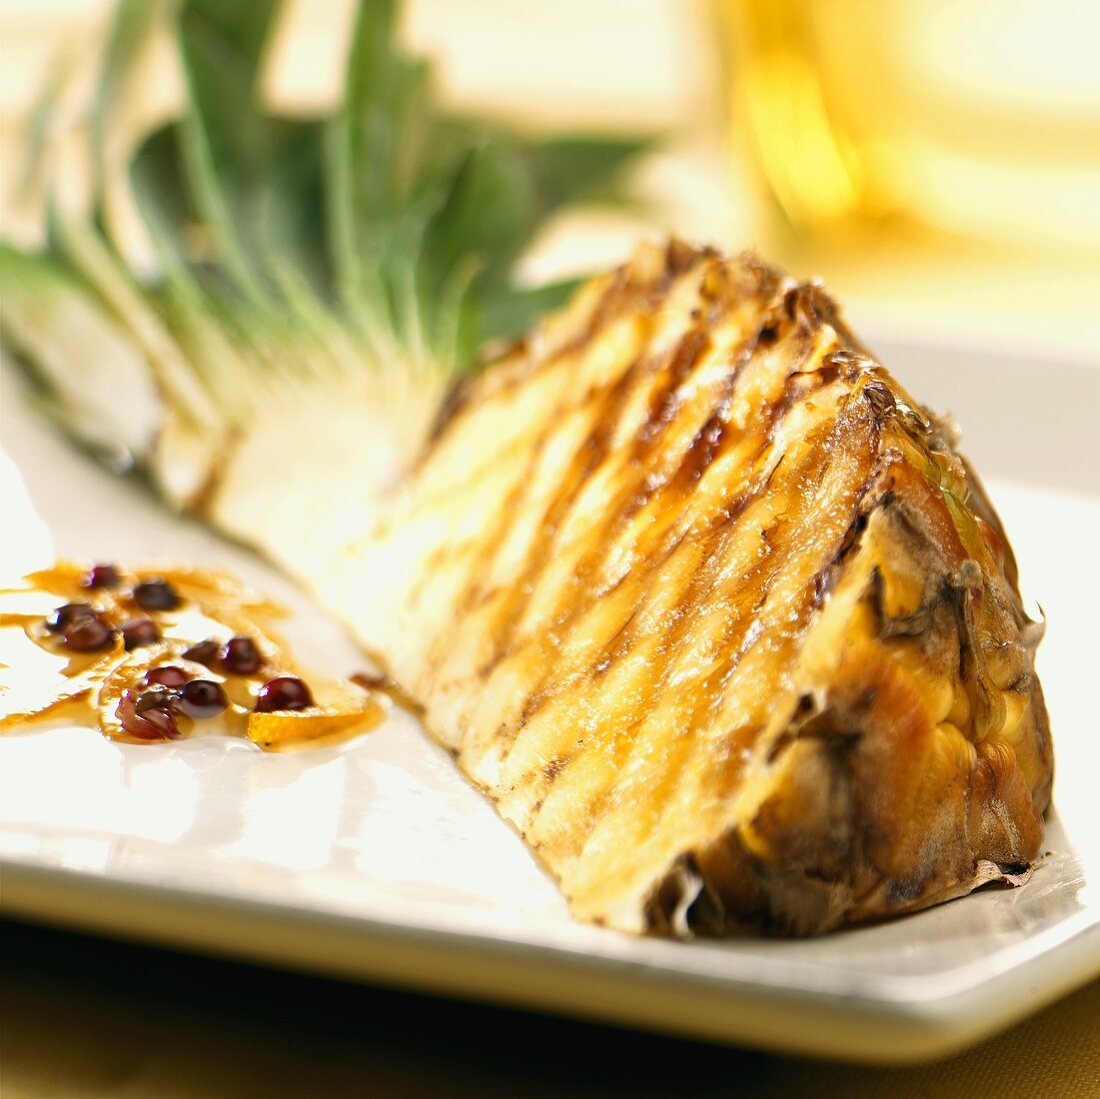 Grilled pineapple quarter & orange sauce with pink peppercorns